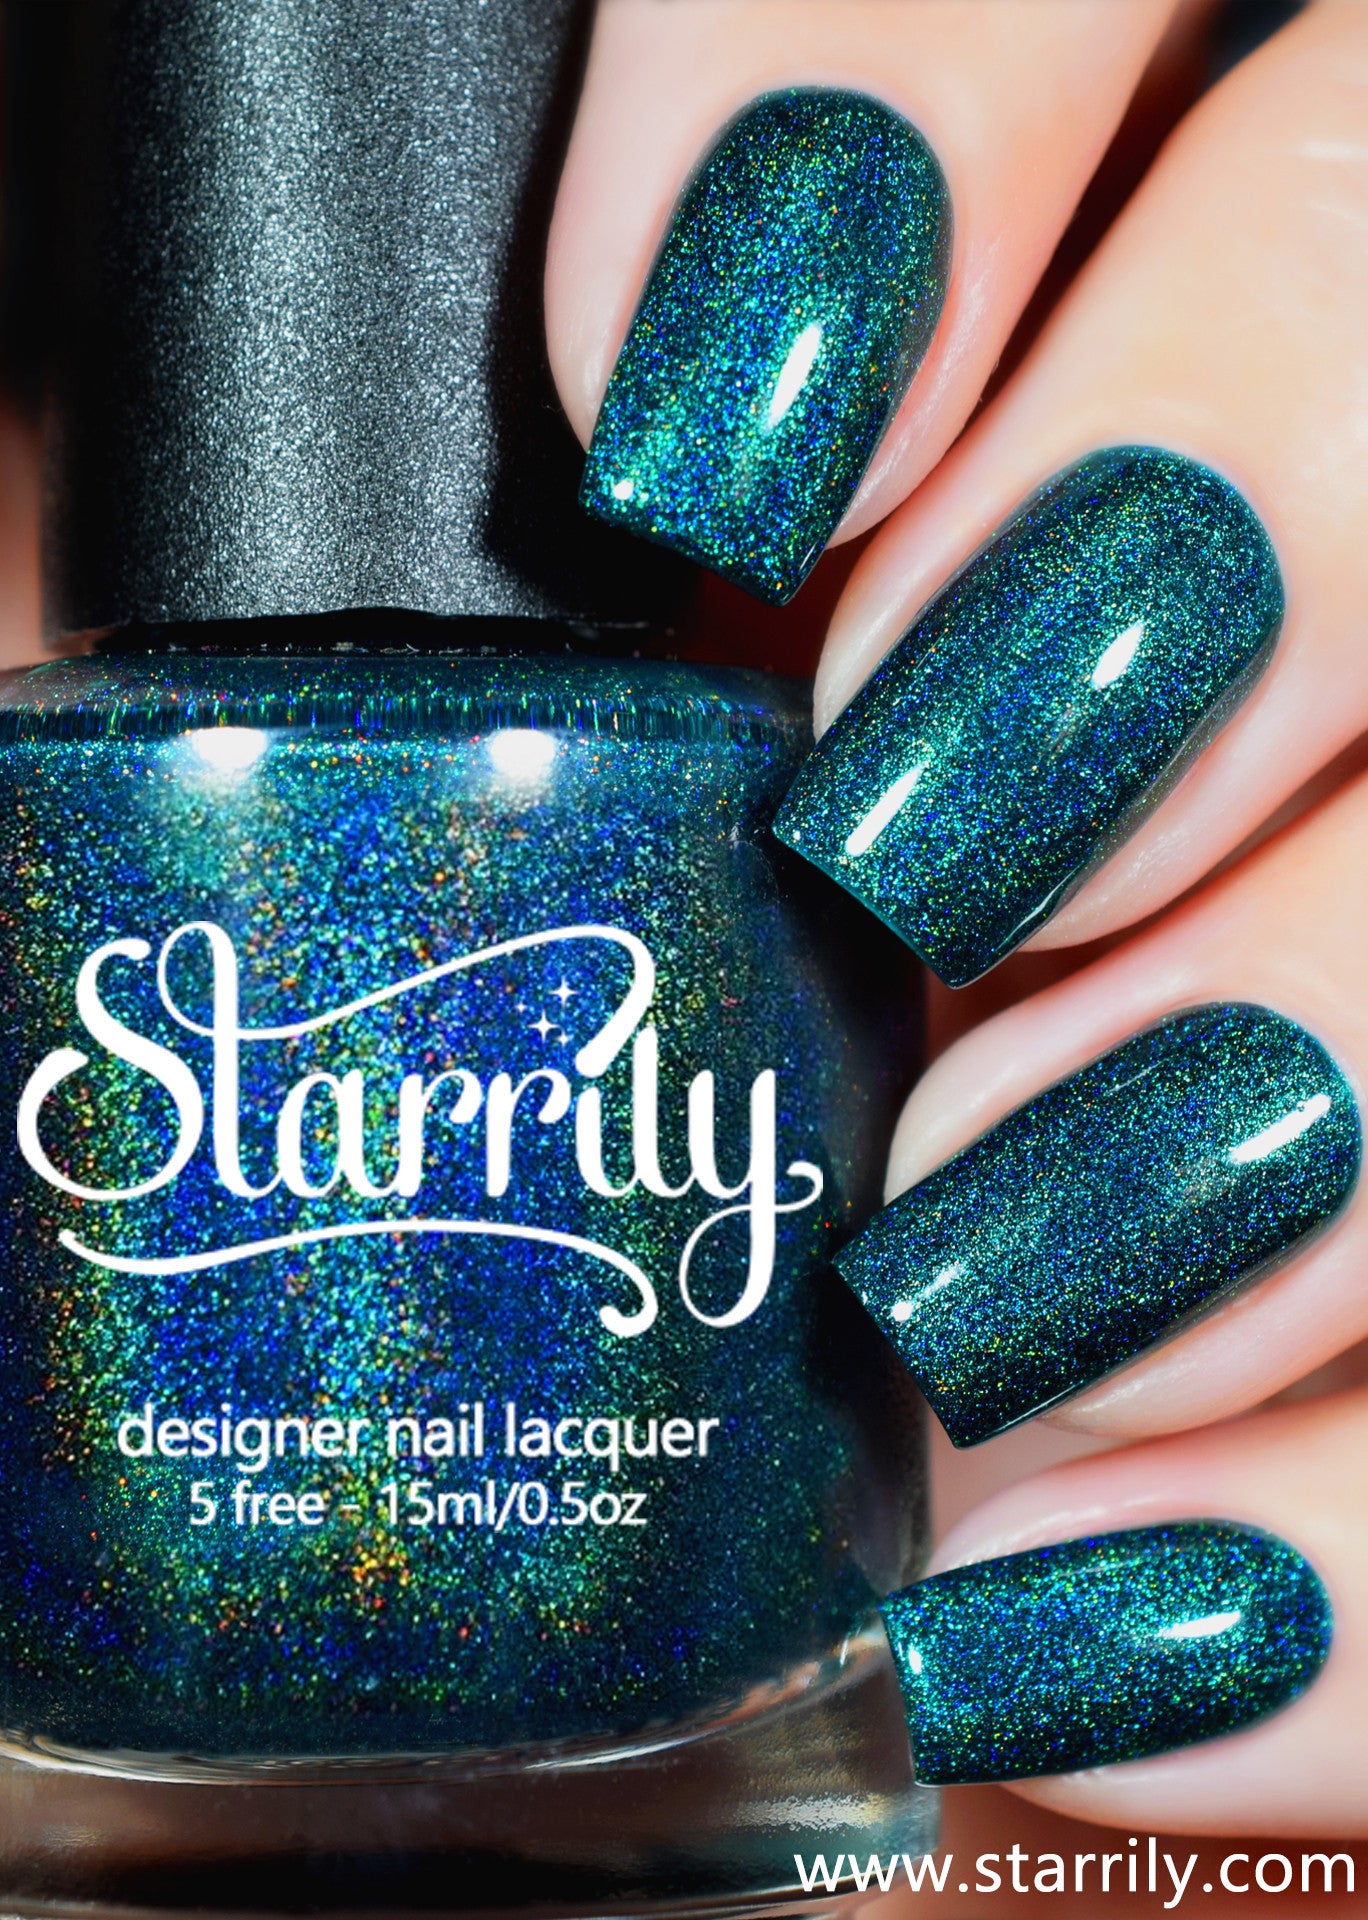 Quantum Energy is a beautiful green linear holographic nail polish